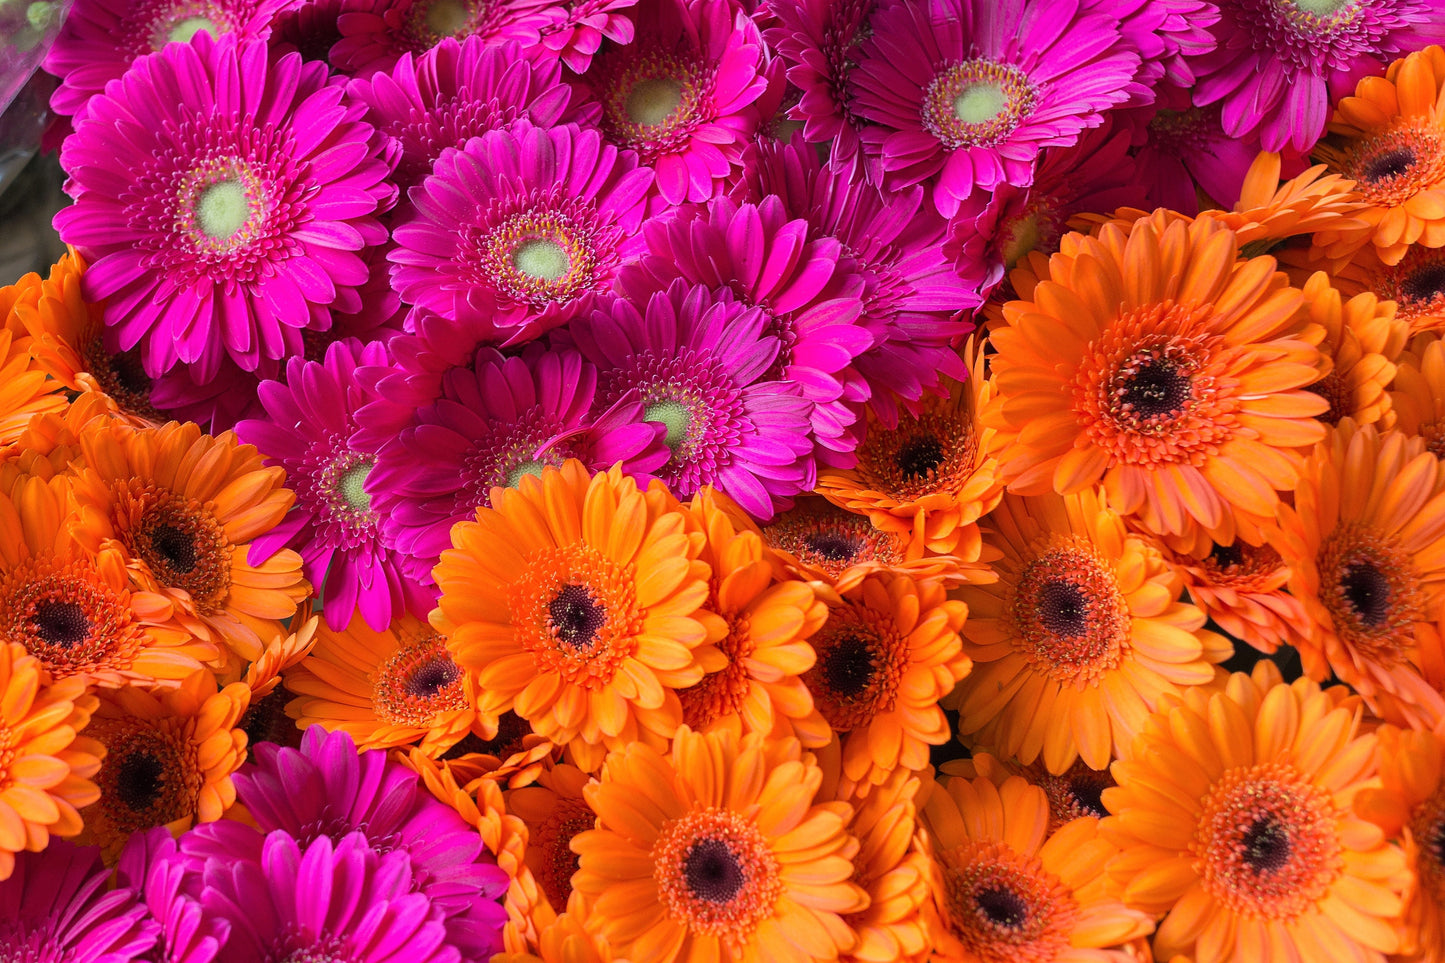 20 GERBER DAISY Mix Gerbera Jamesonii aka Barberton or African Daisy Mixed Colors Pink Purple Red Orange Yellow White Flower Seeds